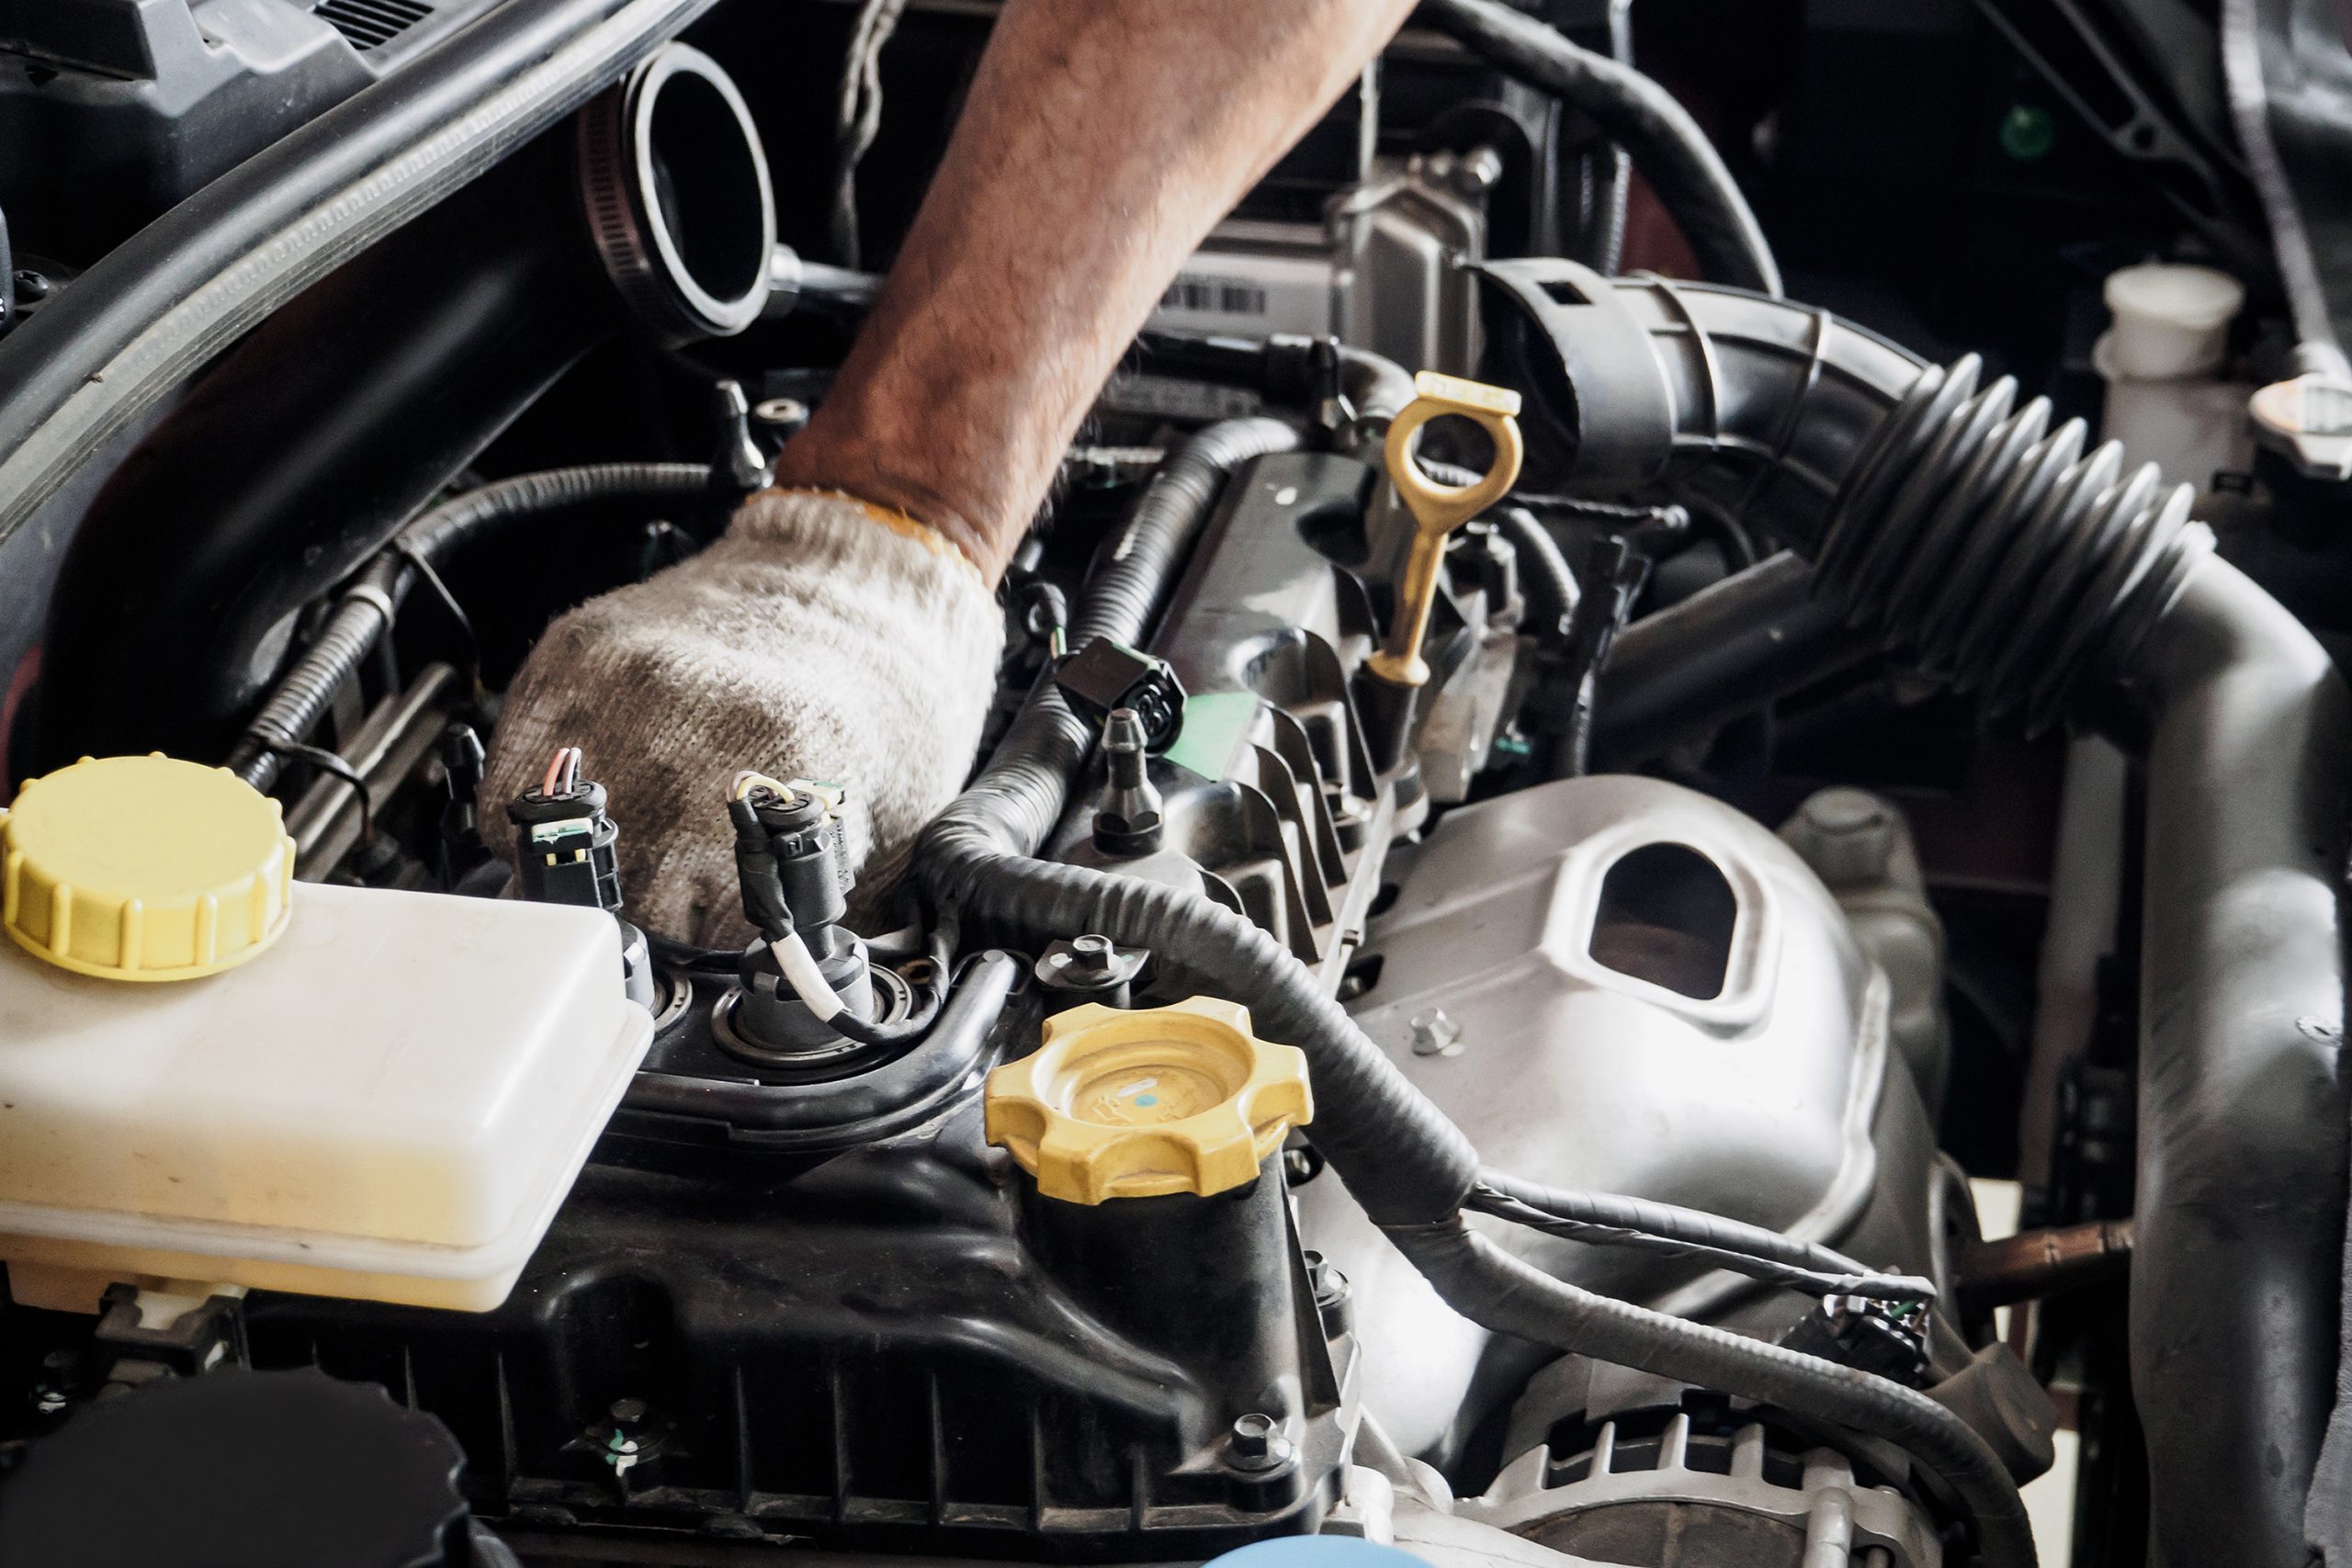 Finding Auto Repair Services That You Can Trust in Surprise, AZ